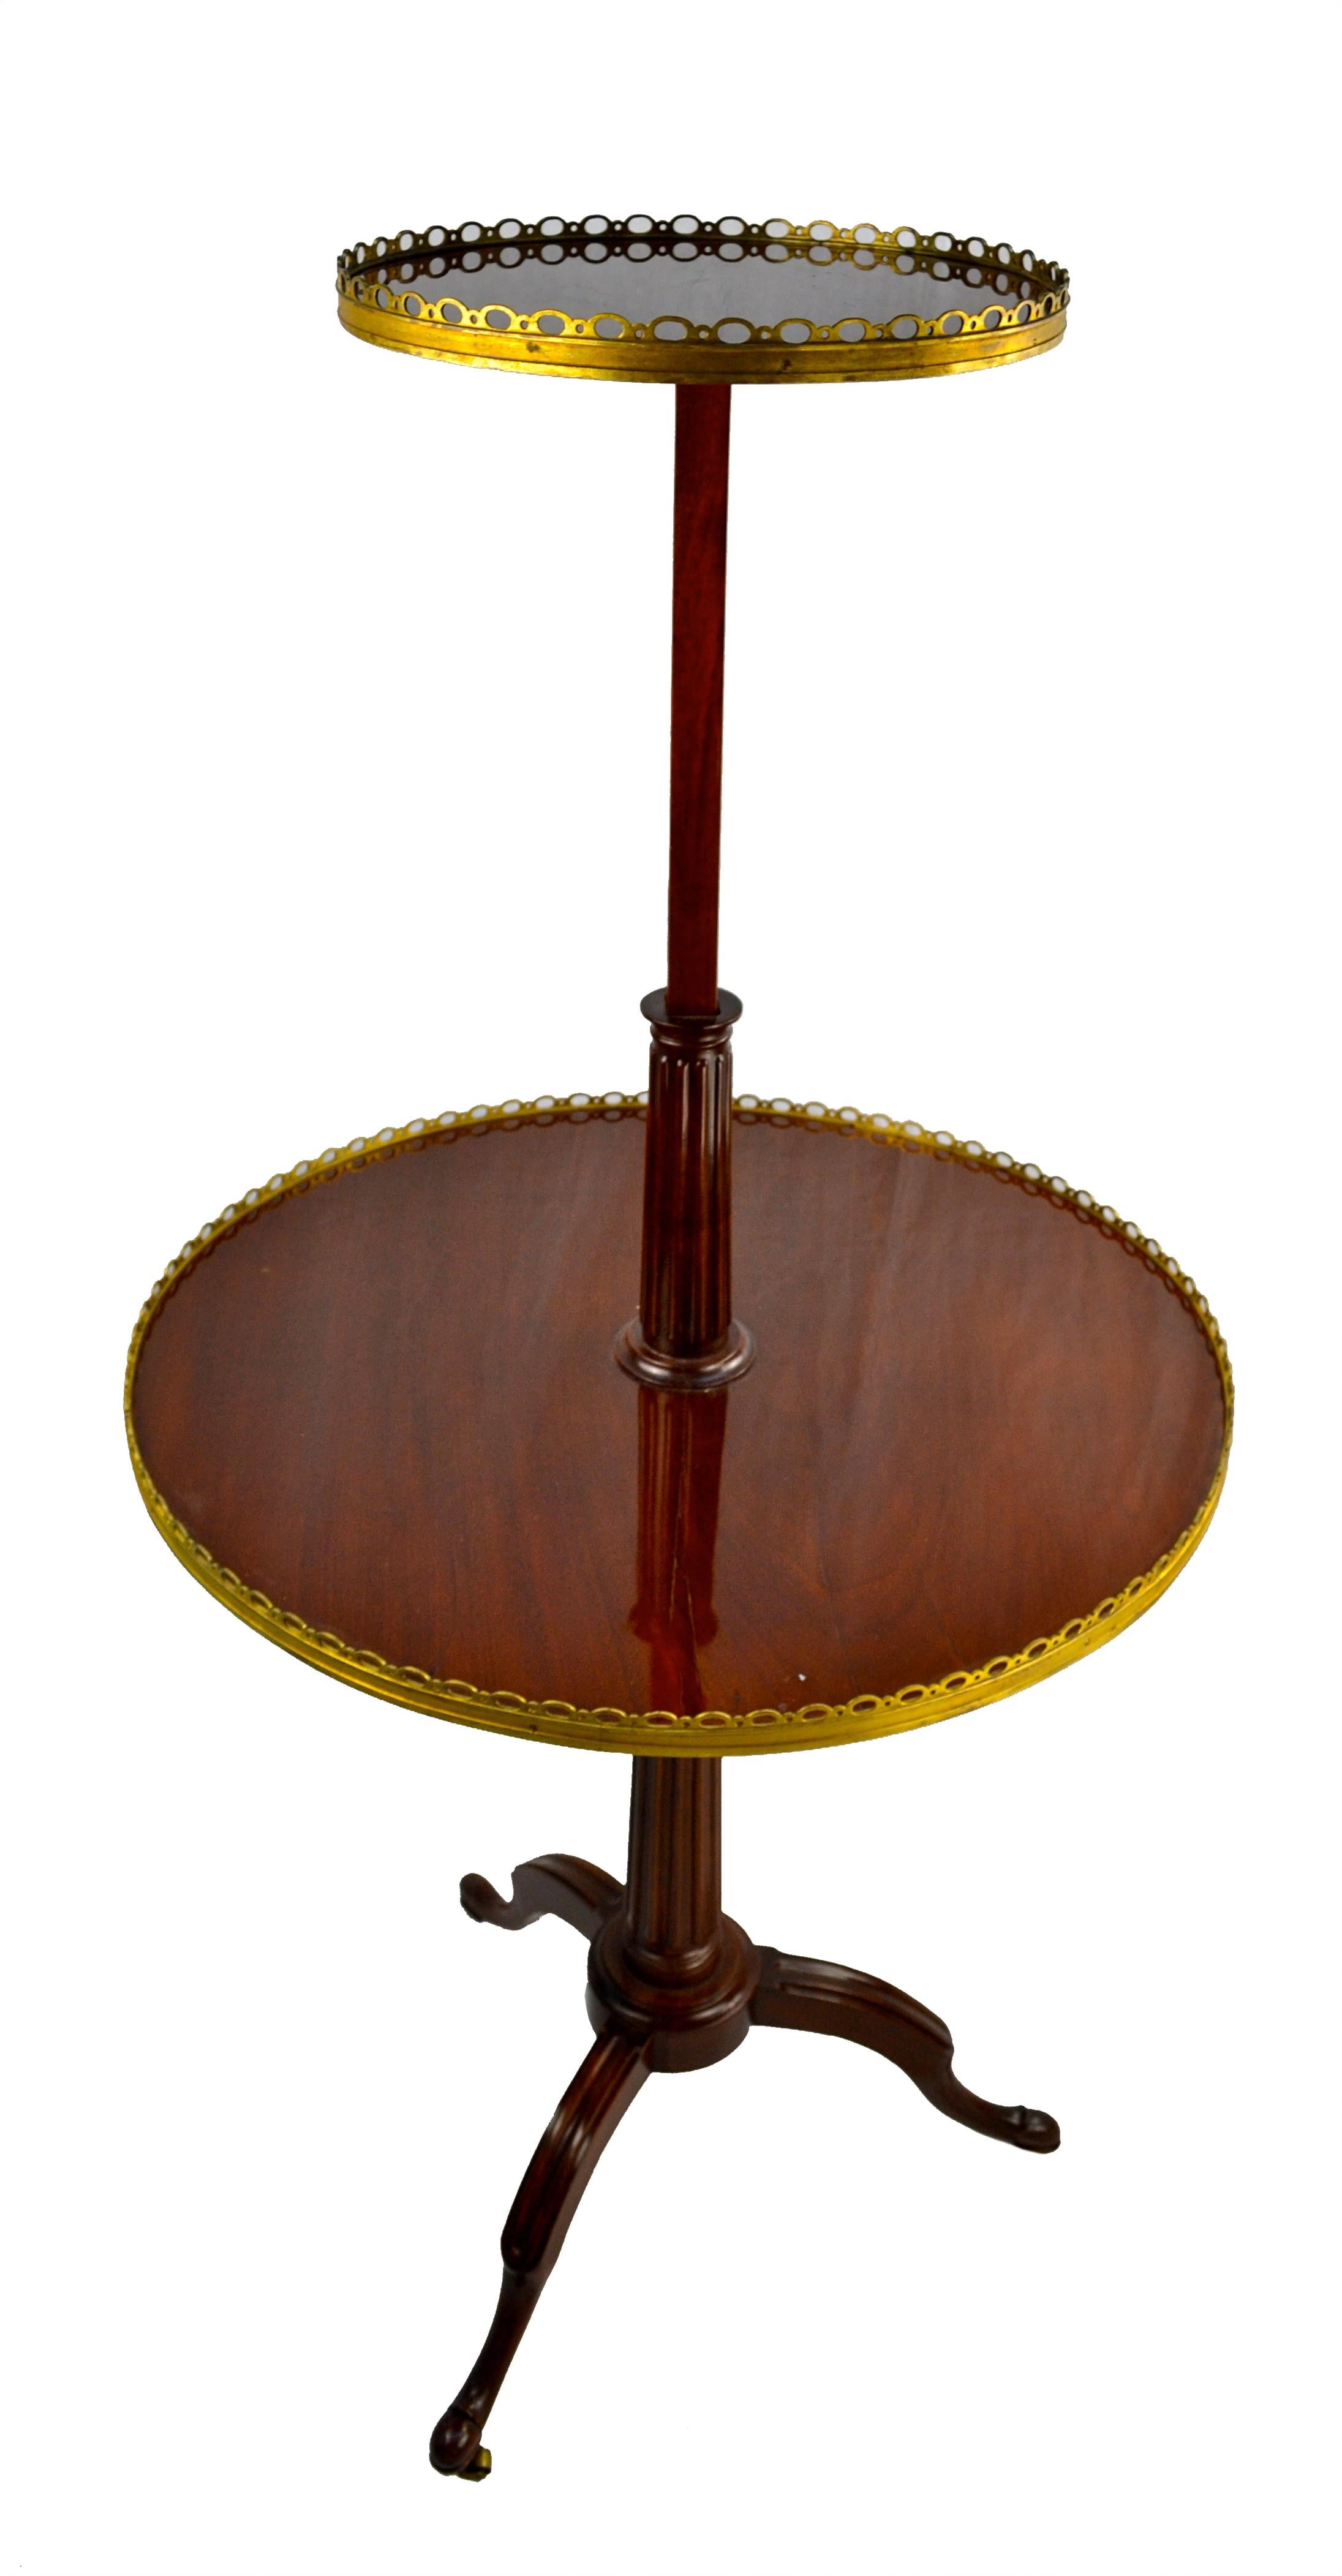 French 18th Century Louis XVI Magogany Dessert /Dumbwaiter Table with Ormolu Trim For Sale